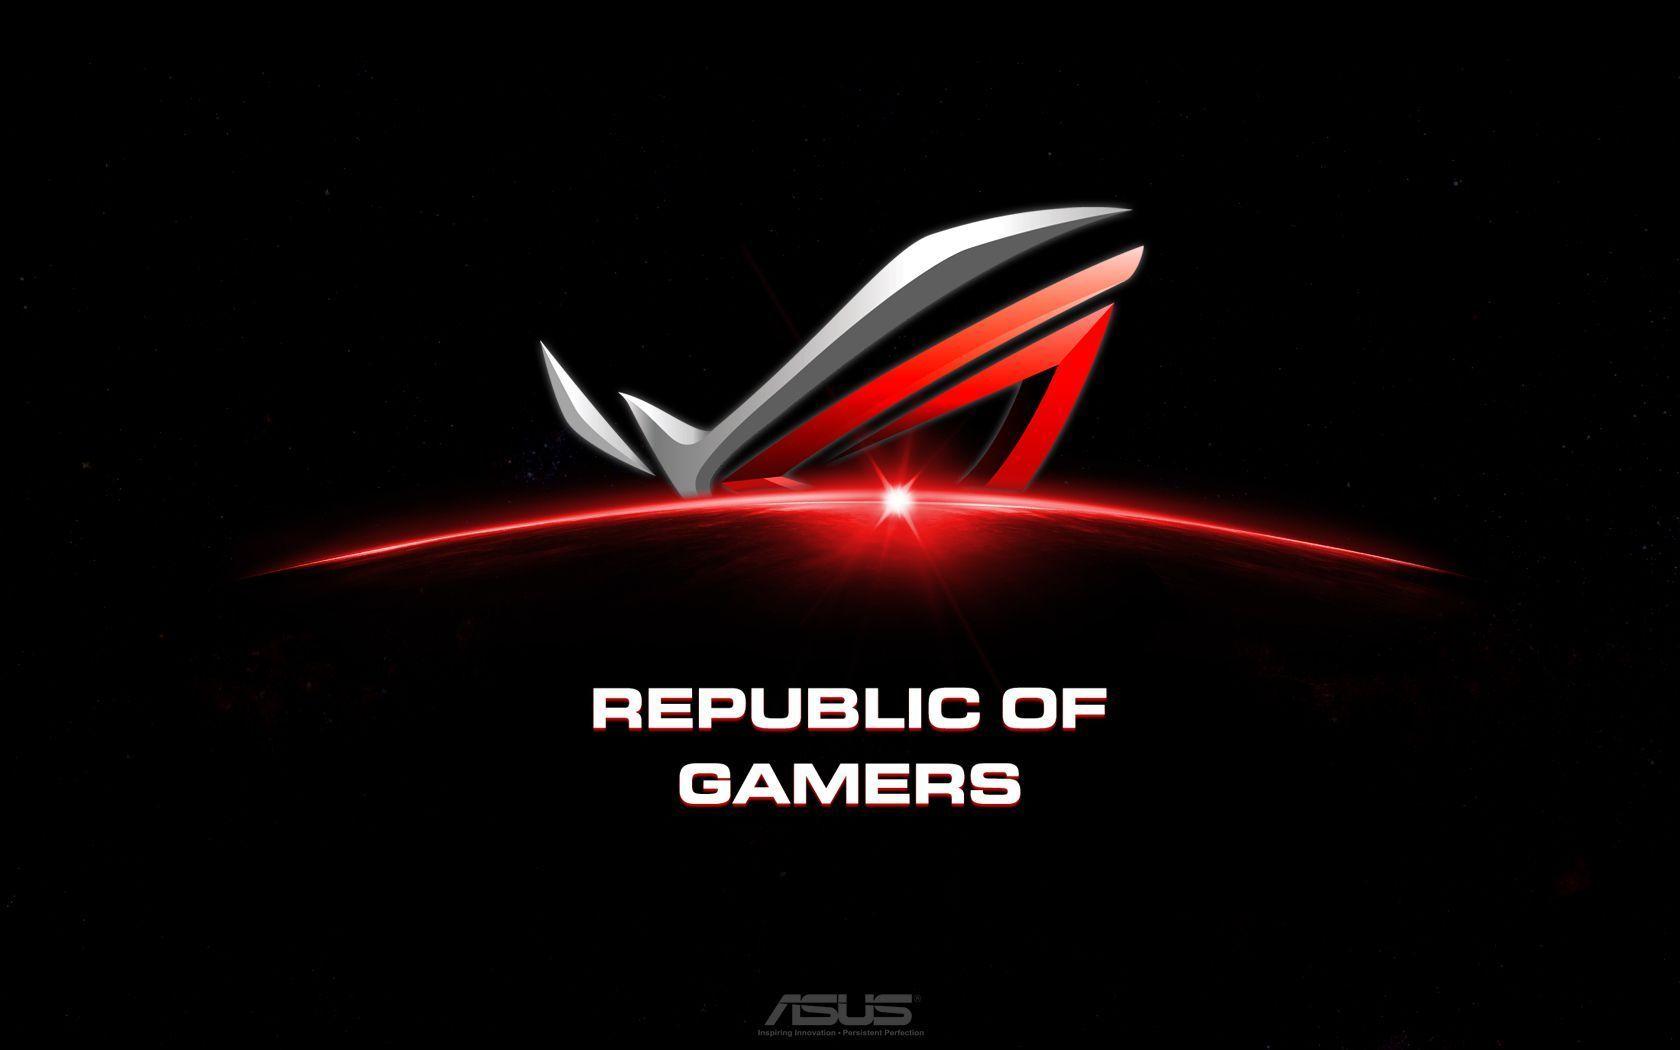 Free Black And Red Gaming Wallpaper Downloads 100 Black And Red Gaming  Wallpapers for FREE  Wallpaperscom